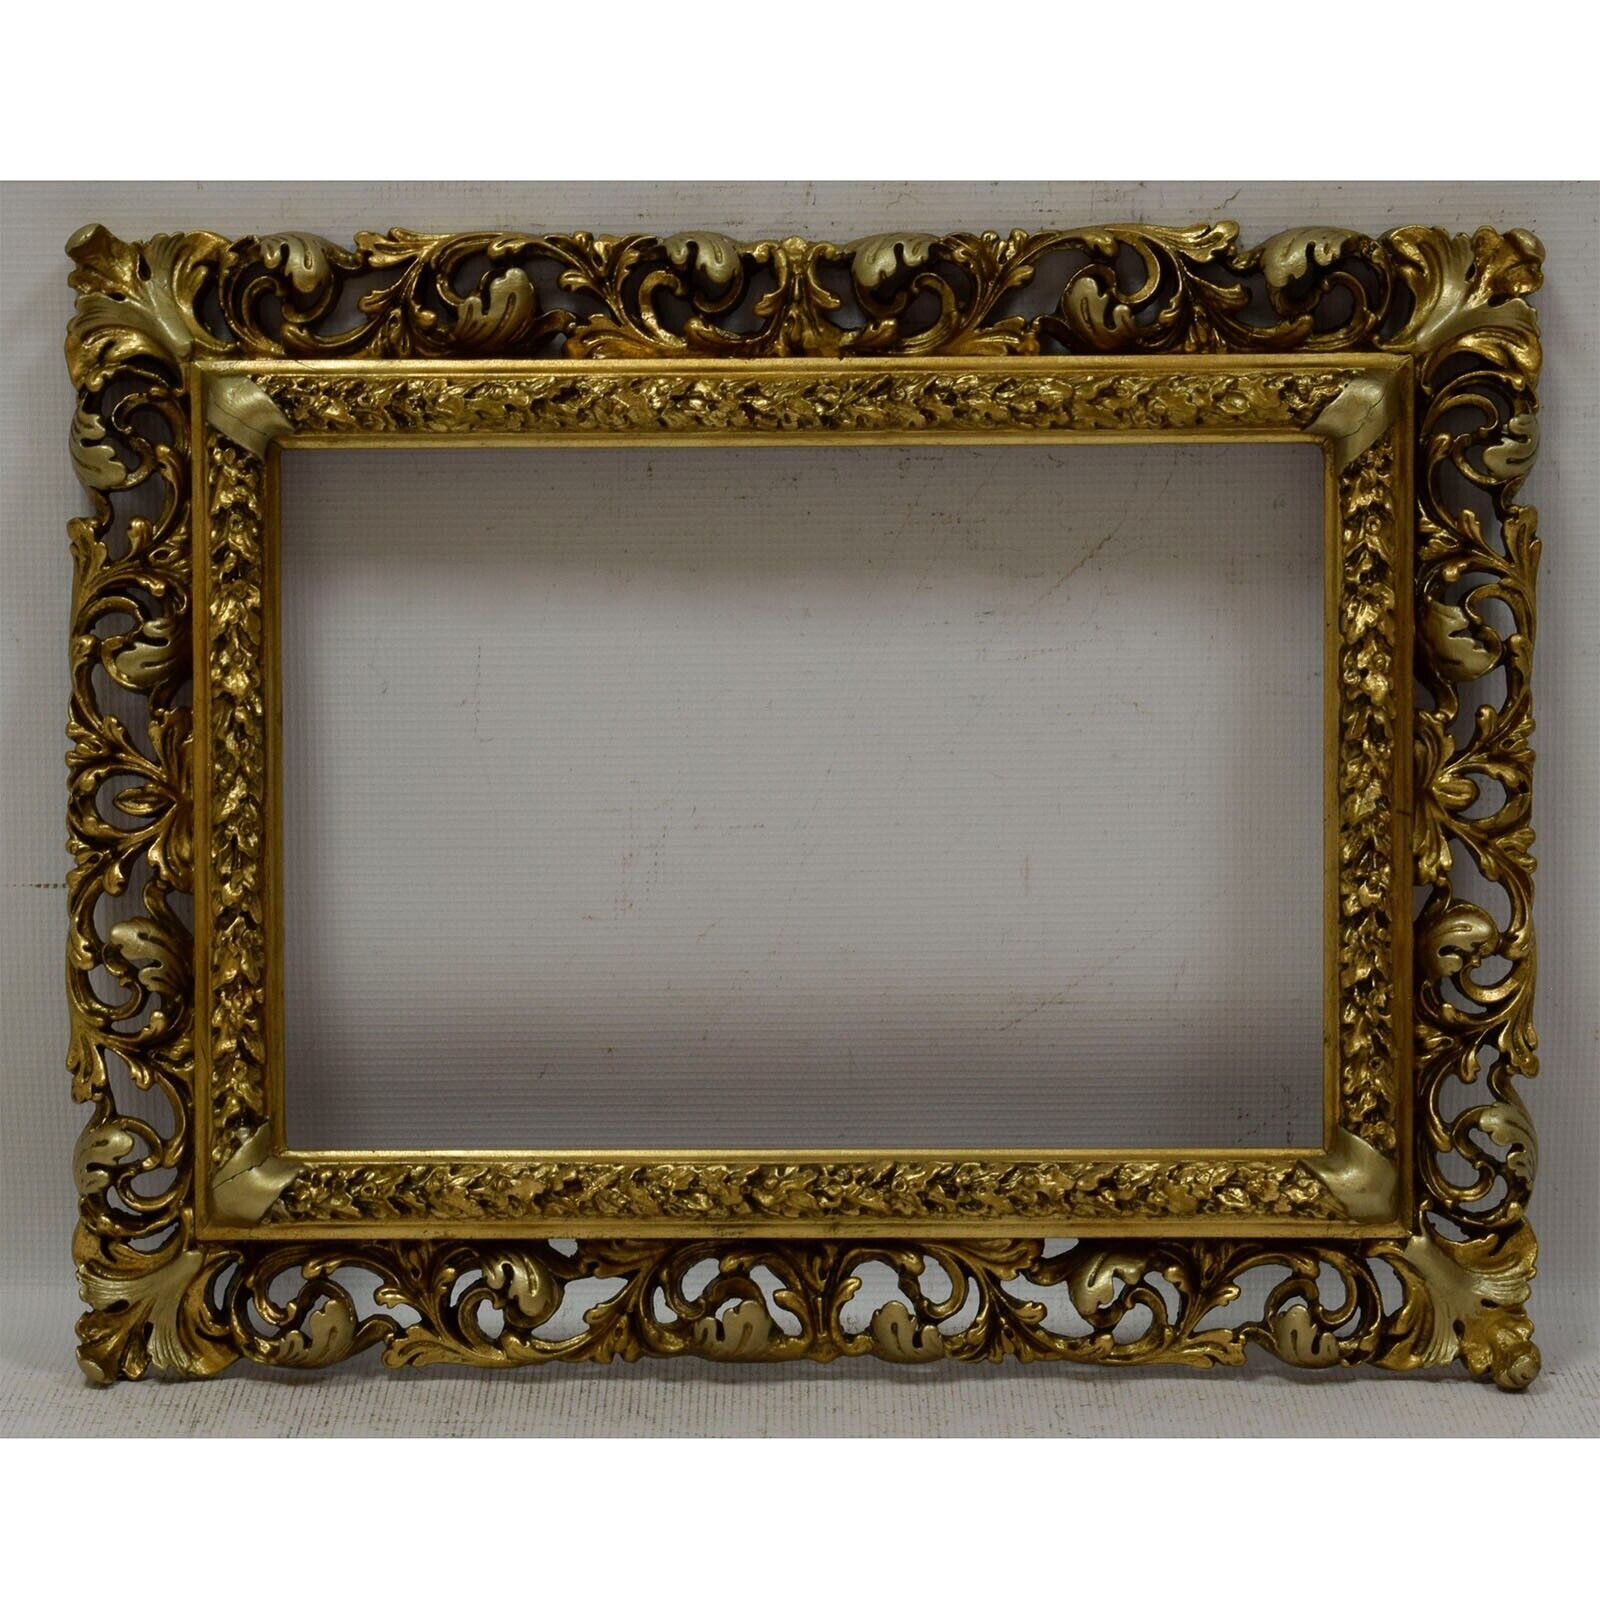 Ca 1850-1900 Old wooden frame Original condition Internal: 14.0 x 9.6 in